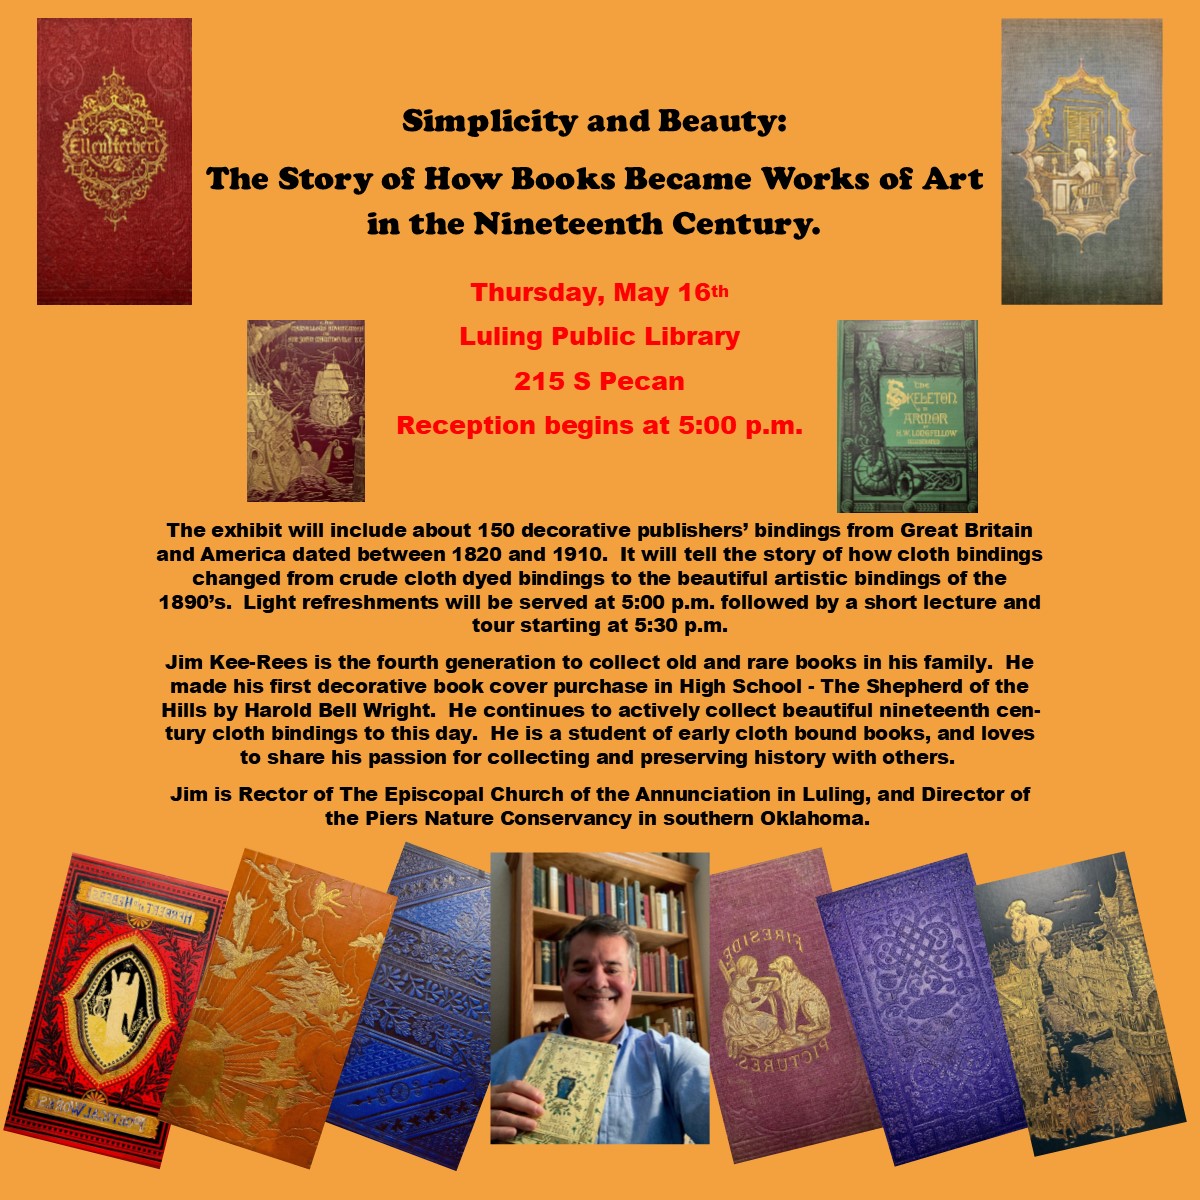 What a unique opportunity to see both art and literature together! Victorian literature set within beautiful cloth bindings - don't miss this rare event! #antiquebooks #bookbinding #oldbooks #thebeautyofoldbooks #simplicityandbeauty #BooksareArt #lulingtexas #lulingpubliclibrary